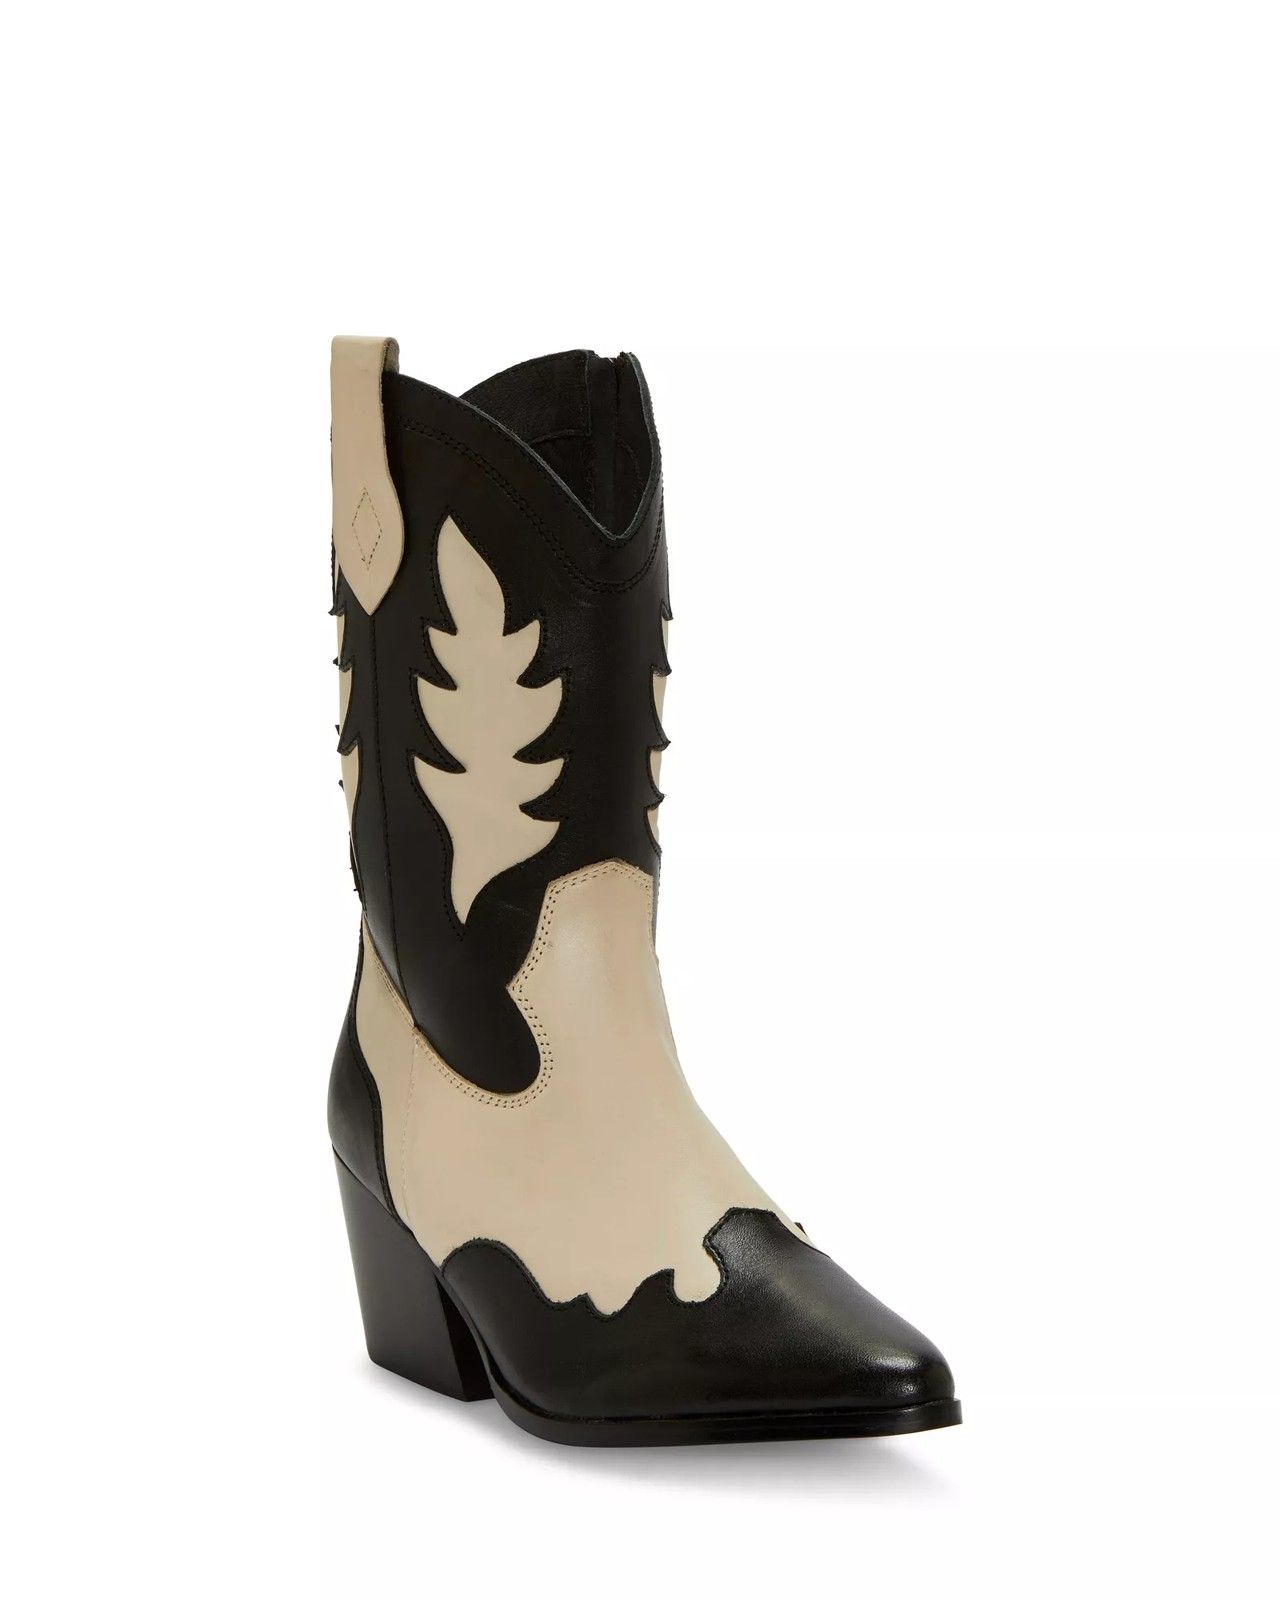 Vince Camuto Lunnia Bootie | Vince Camuto